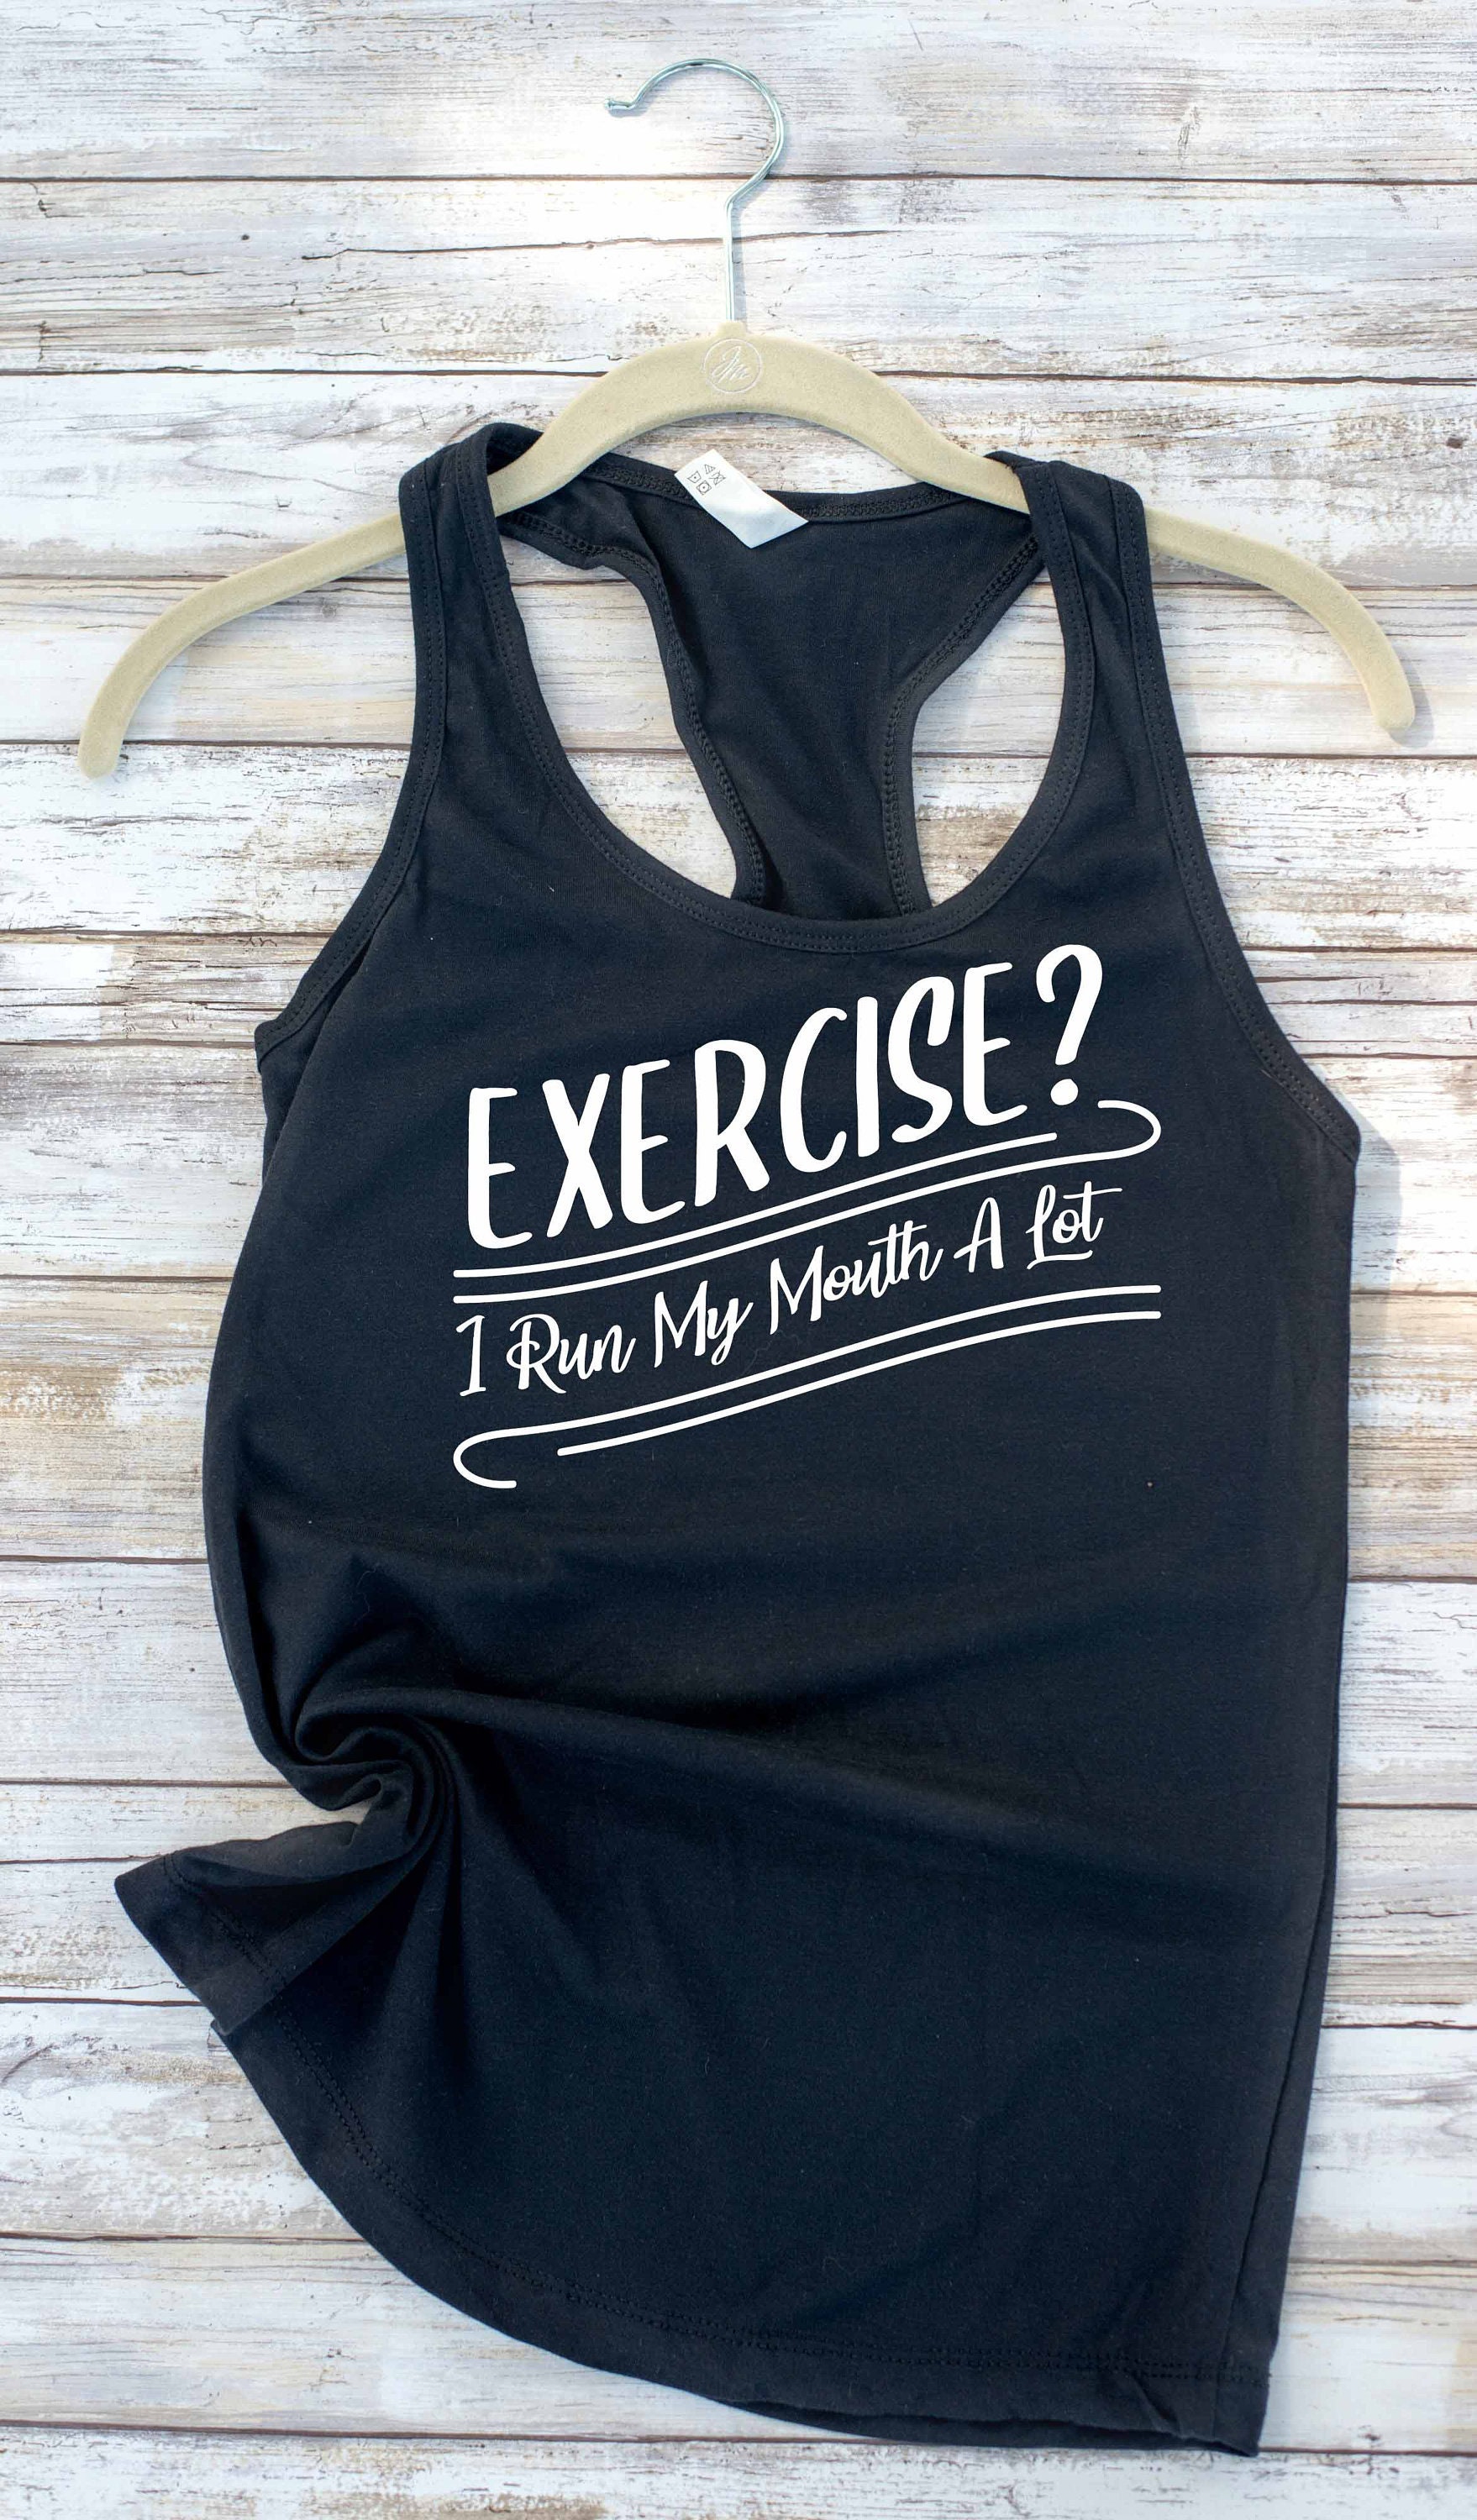 Exercise? I Run My Mouth A Lot - Racer Back Tank - Ladies Tank Top -  Workout Gear by Vast Space Art - Women's Tank Top, Print Tank Top